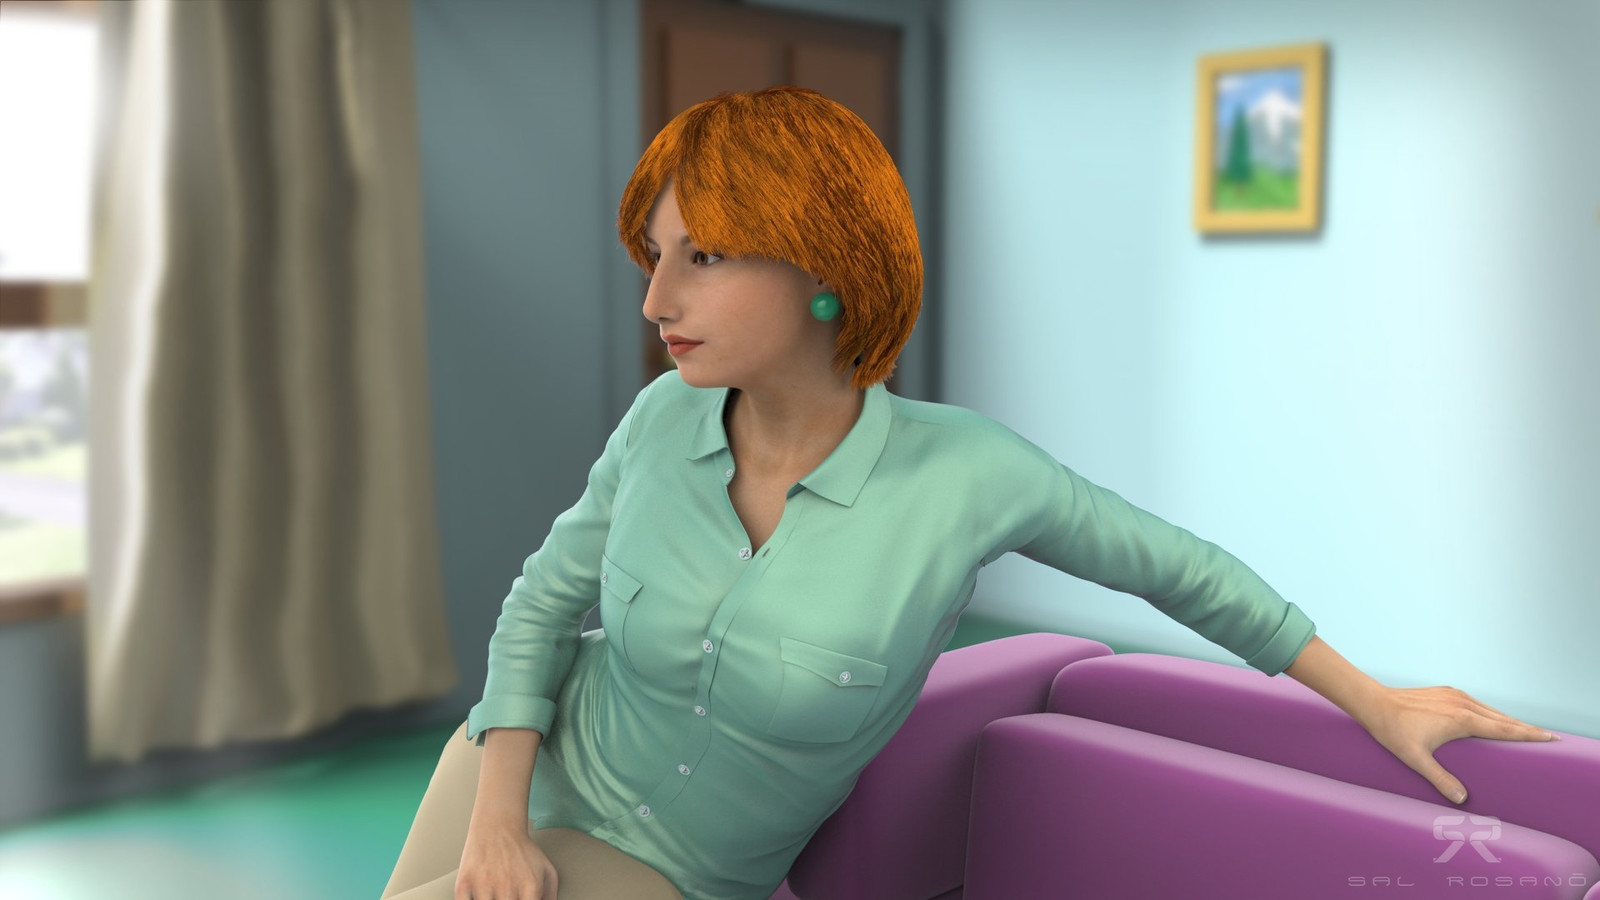 The SIMS 4 Lois Griffin